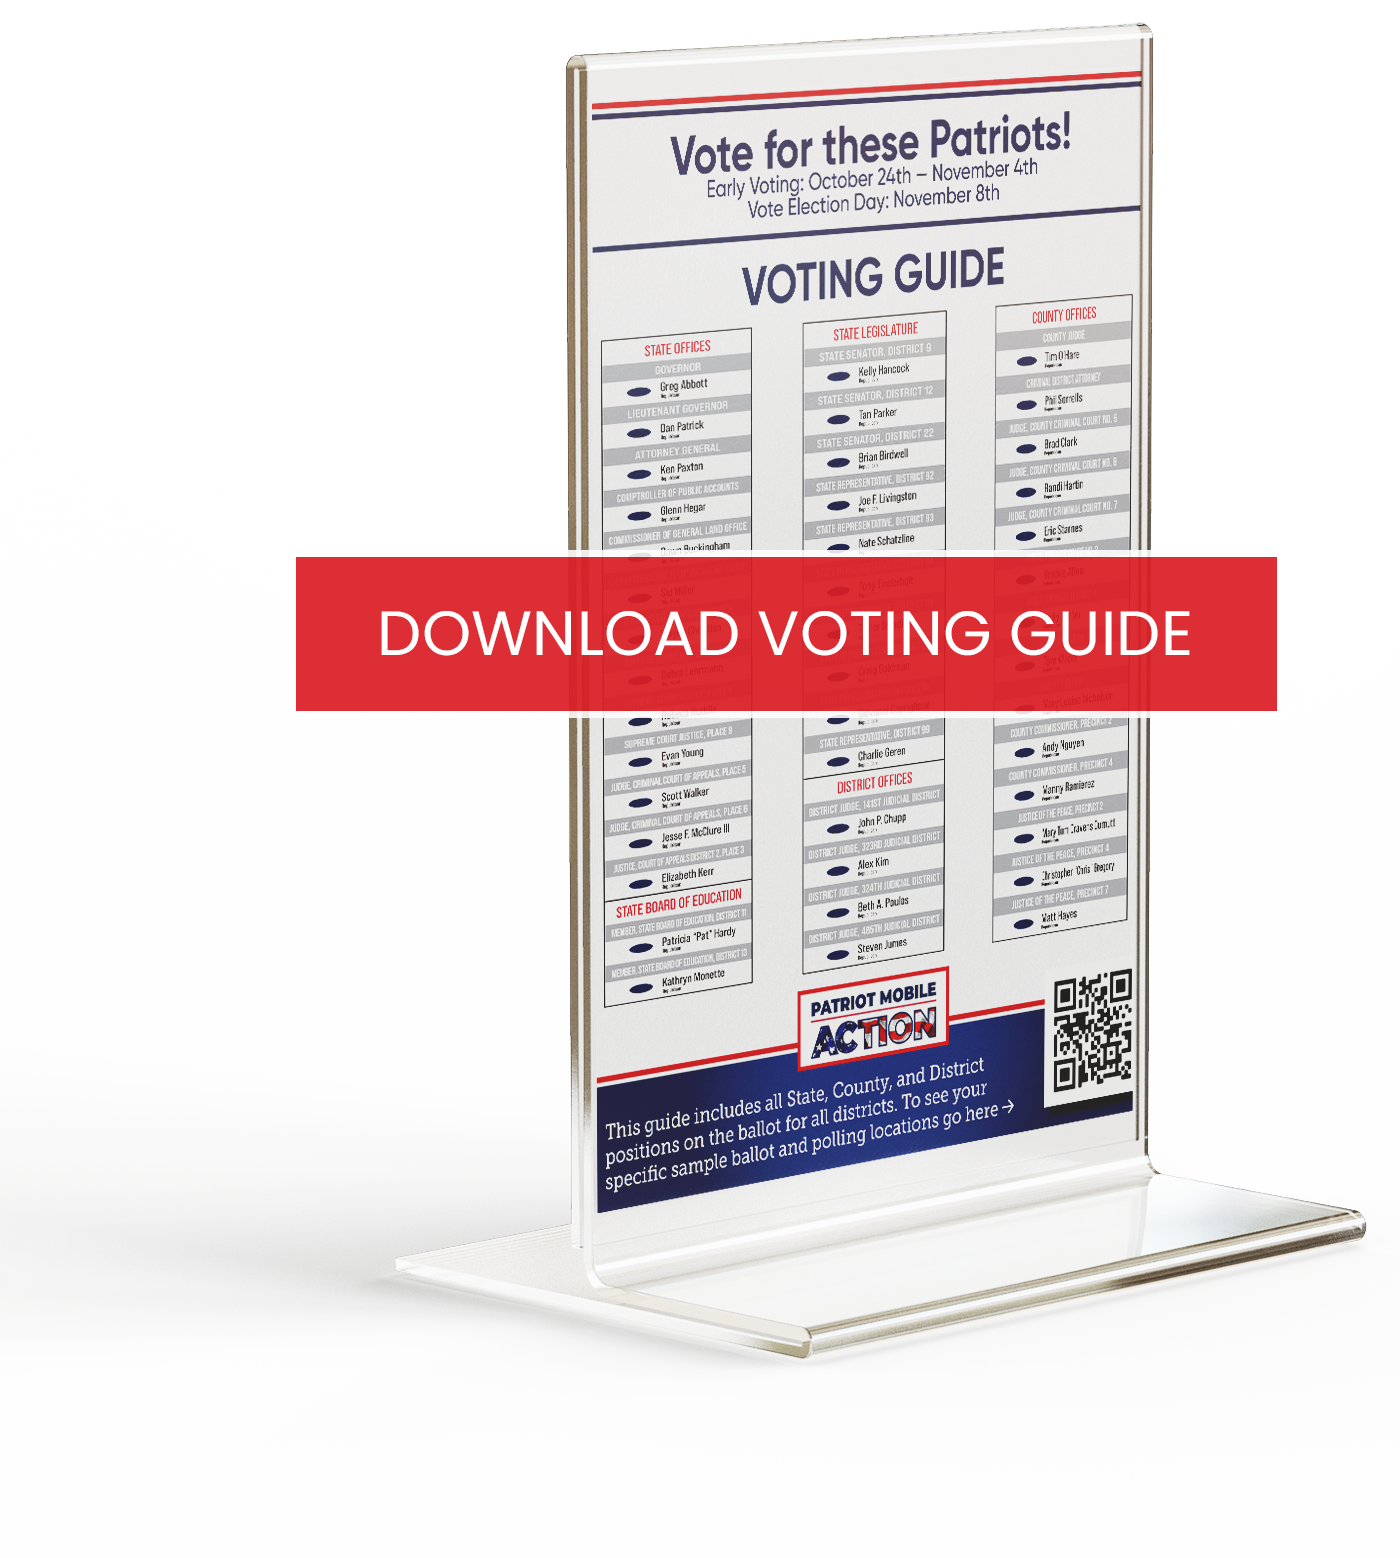 Download Voting Guide